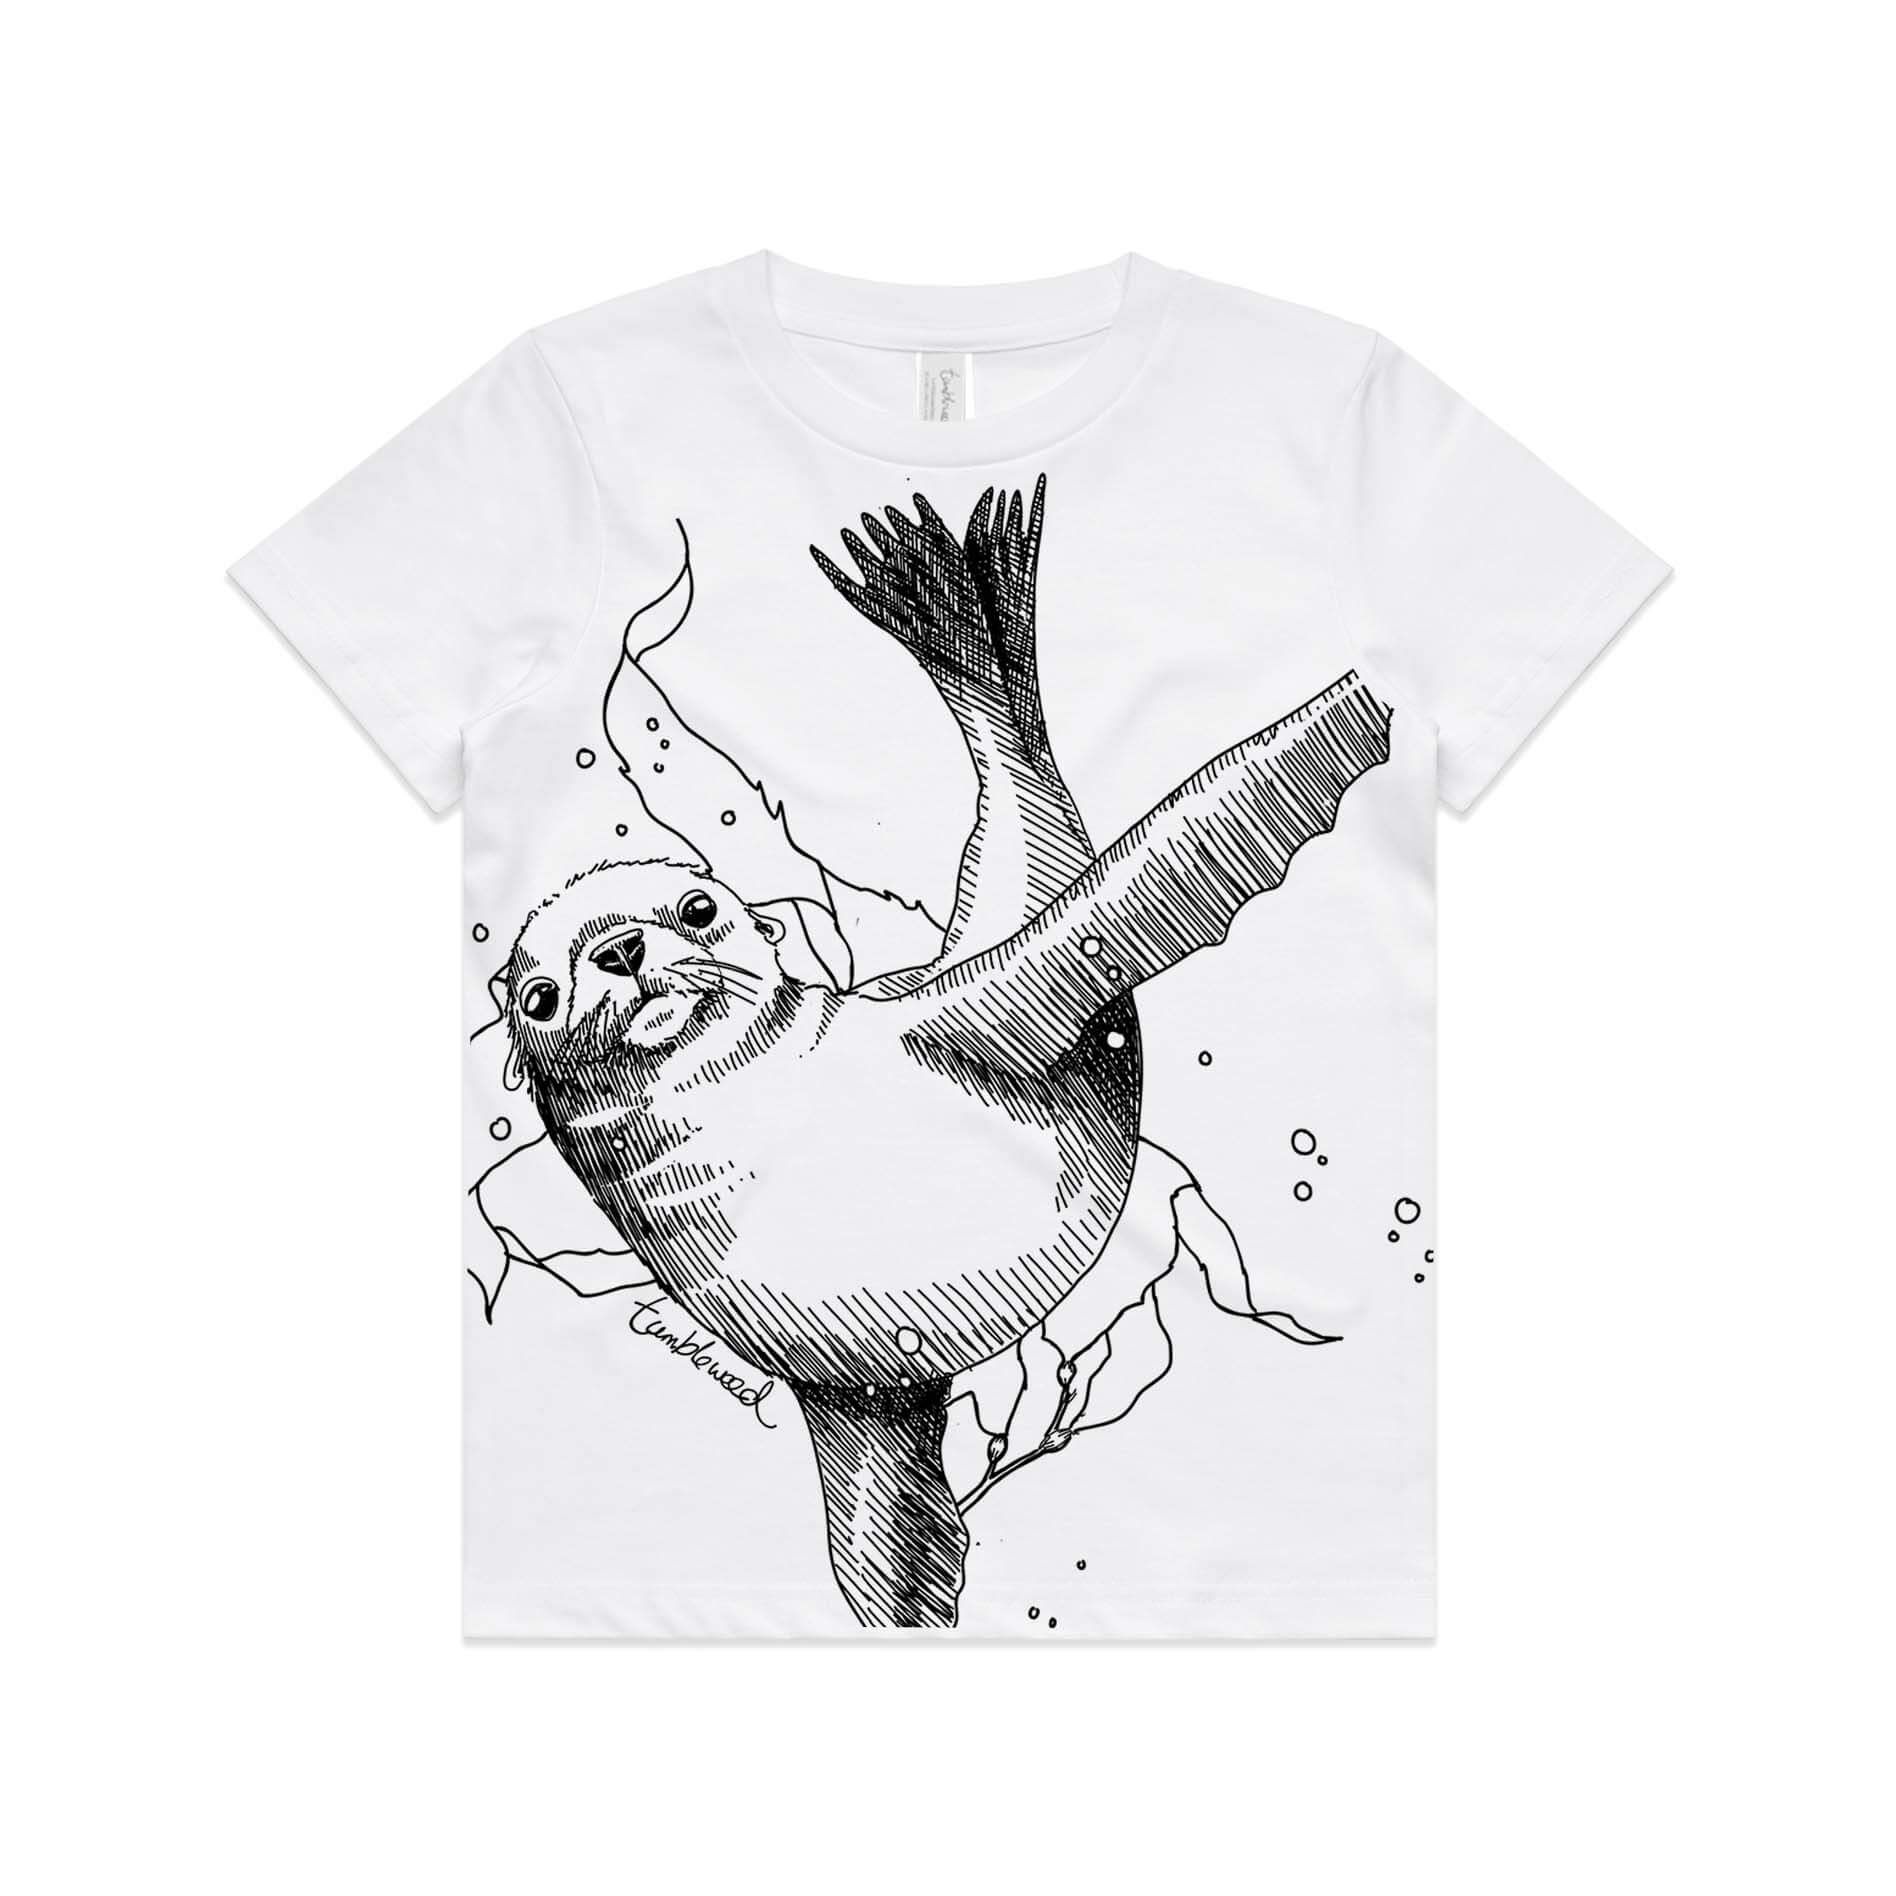 White, kids’ t-shirt featuring a screen printed New Zealand sea lion design.